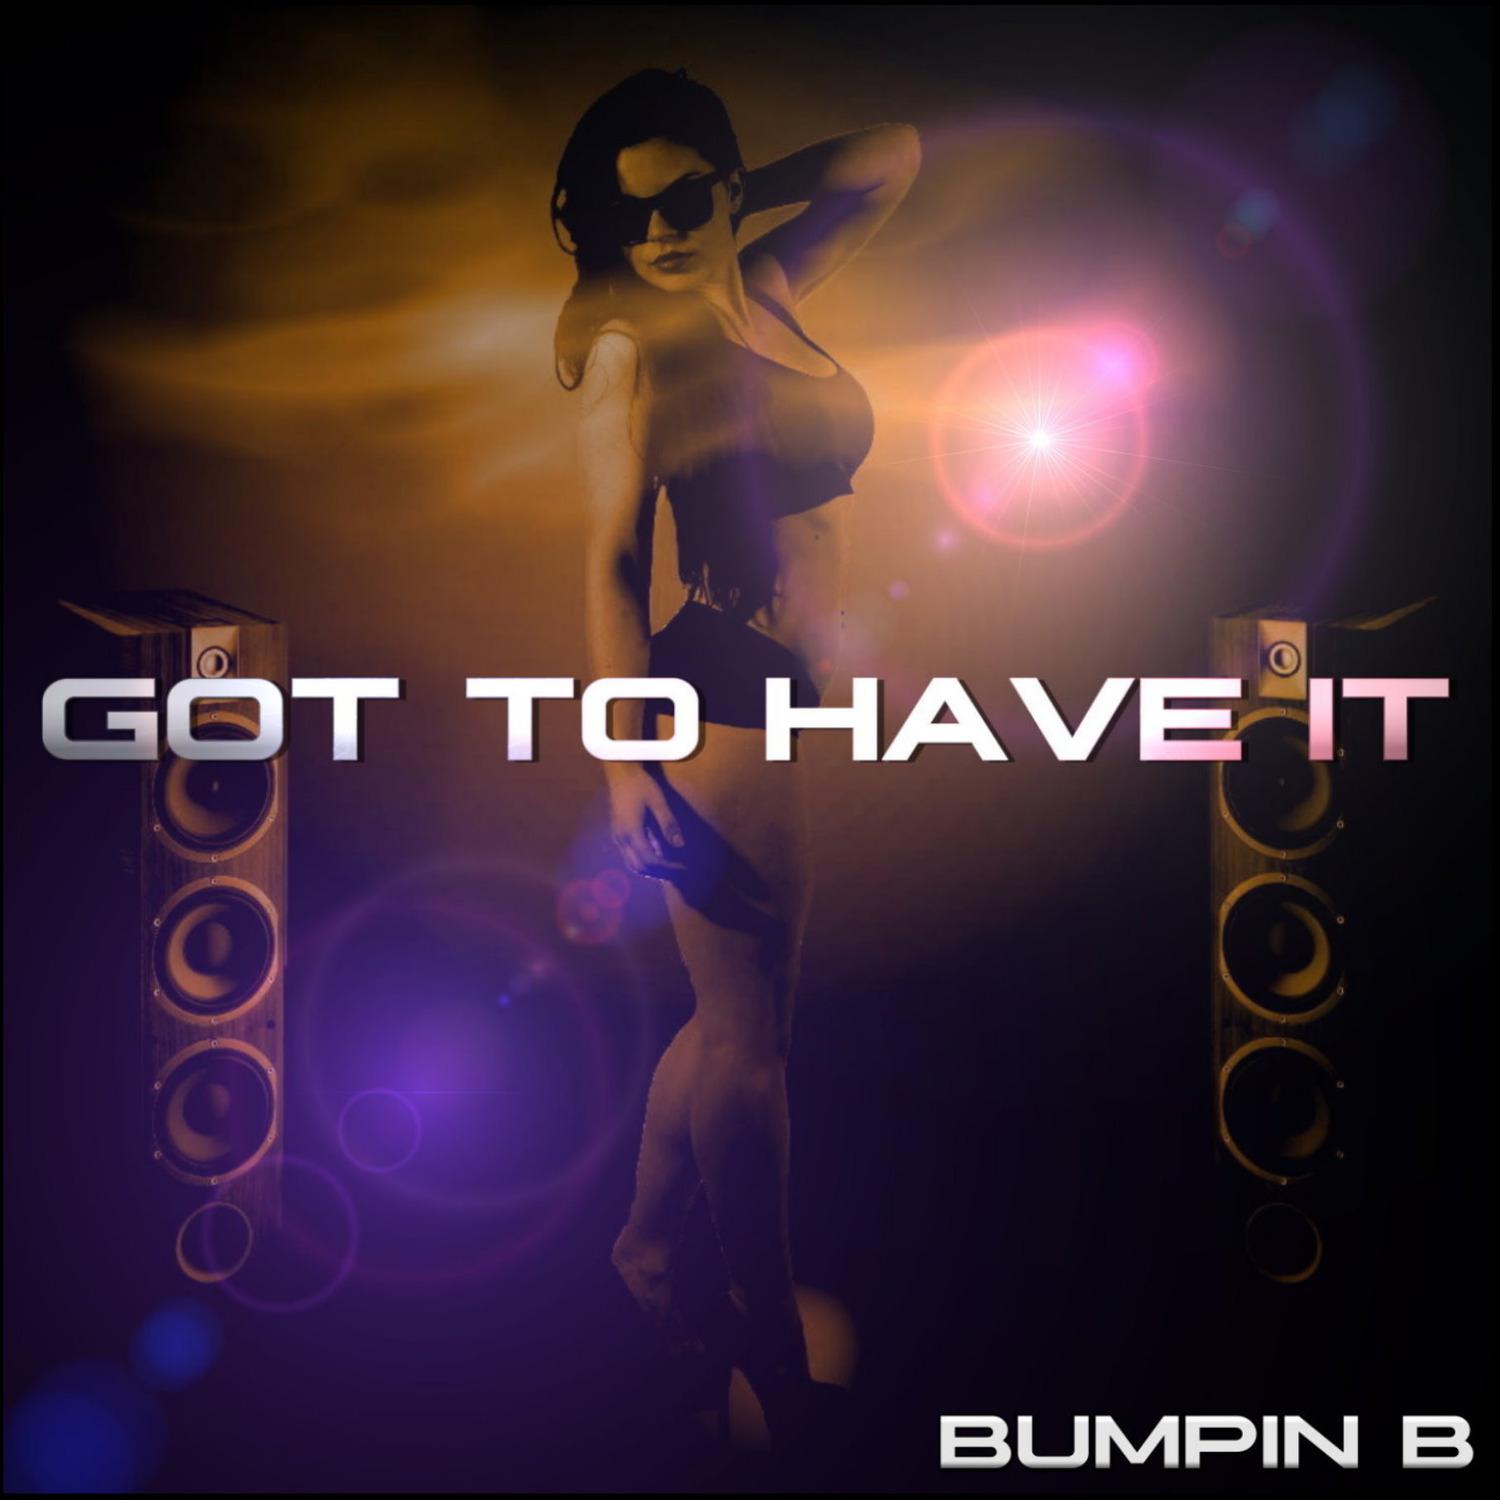 Bumpin B - I Just Can't Let You Go (feat. Jasmine Chloe)